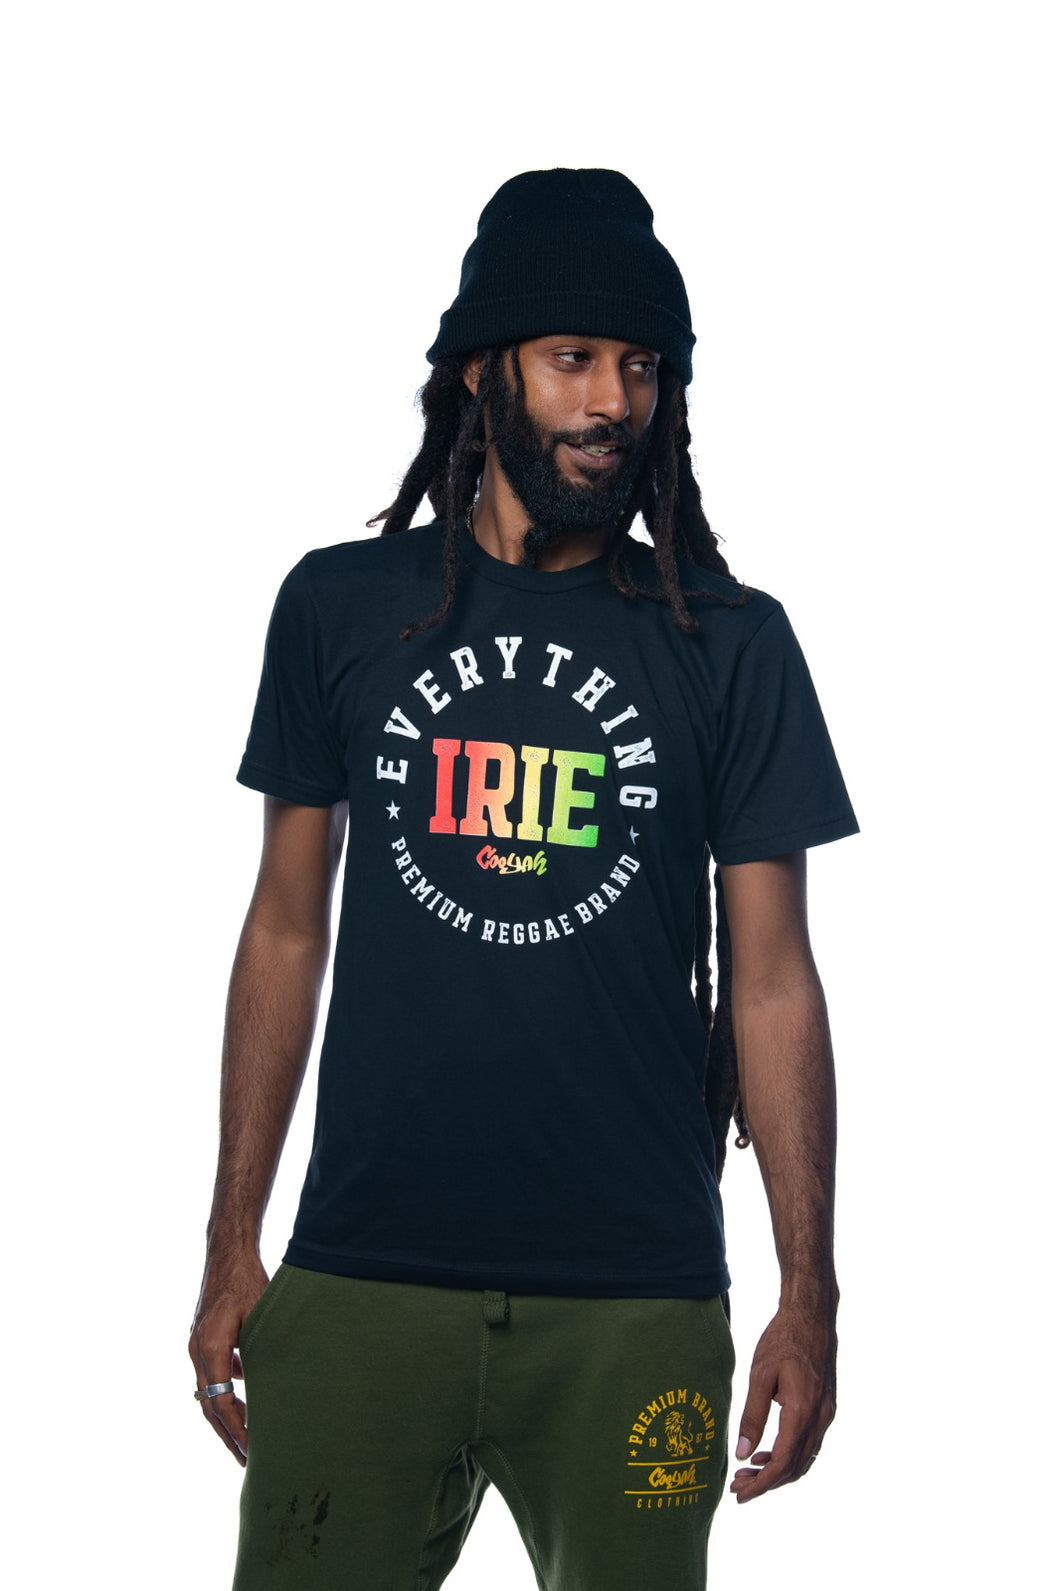 Cooyah Jamaica Everything Irie men's short sleeve graphic tee with reggae colors. Jamaican clothing brand.